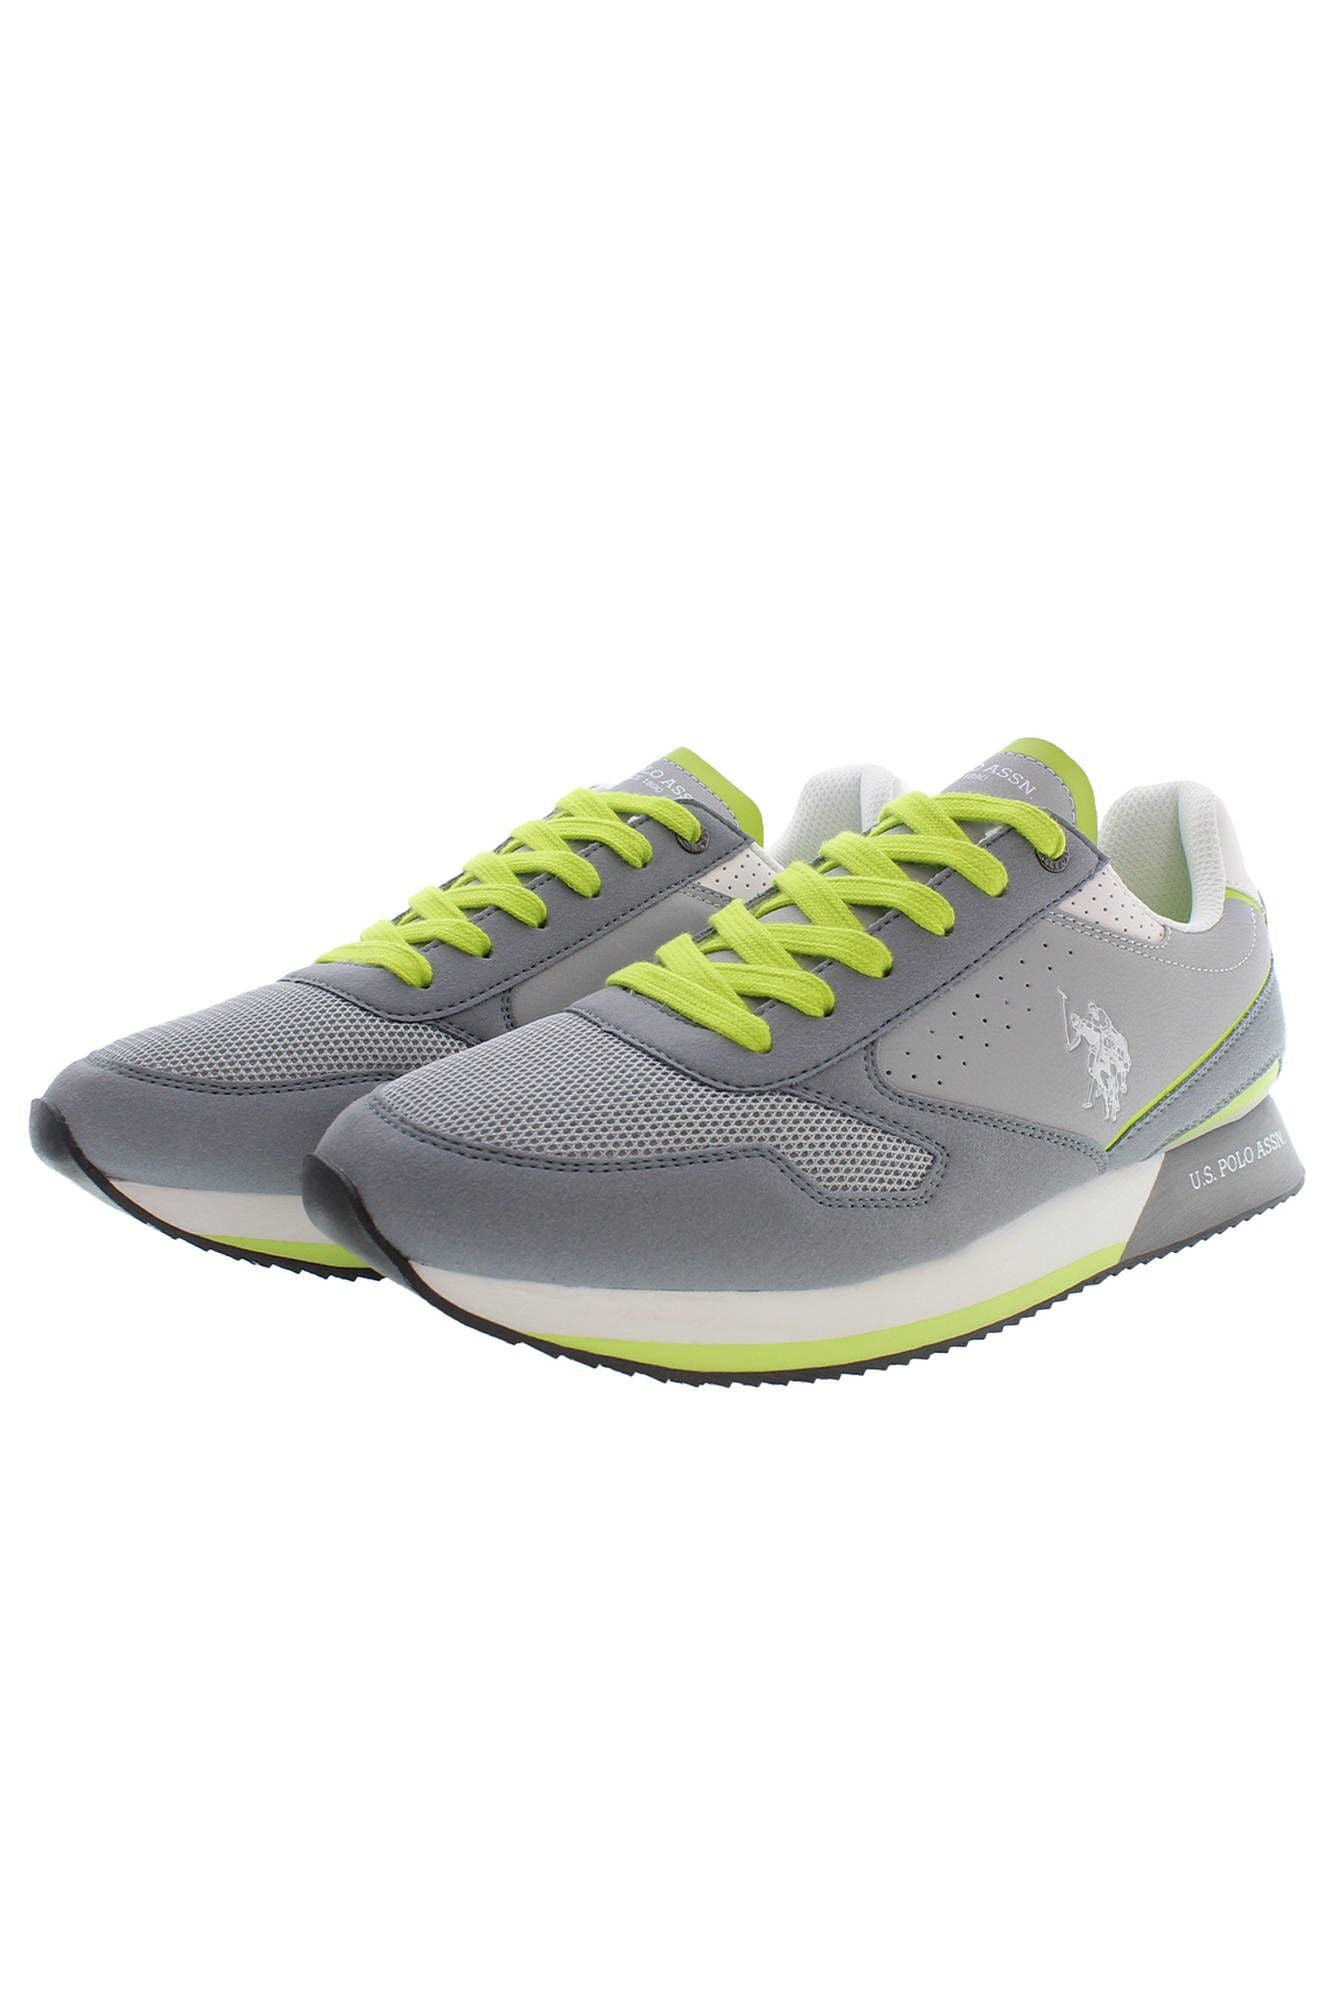 U.S. POLO ASSN. Dapper Gray Lace-Up Sports Sneakers